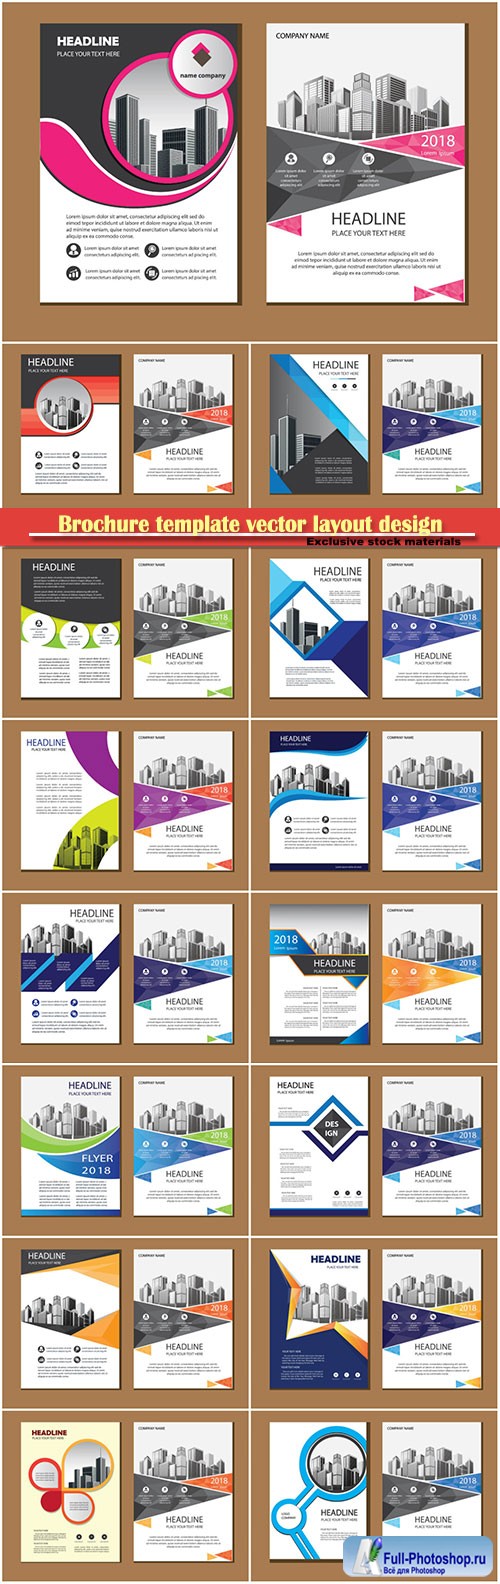 Brochure template vector layout design, corporate business annual report, magazine, flyer mockup # 164